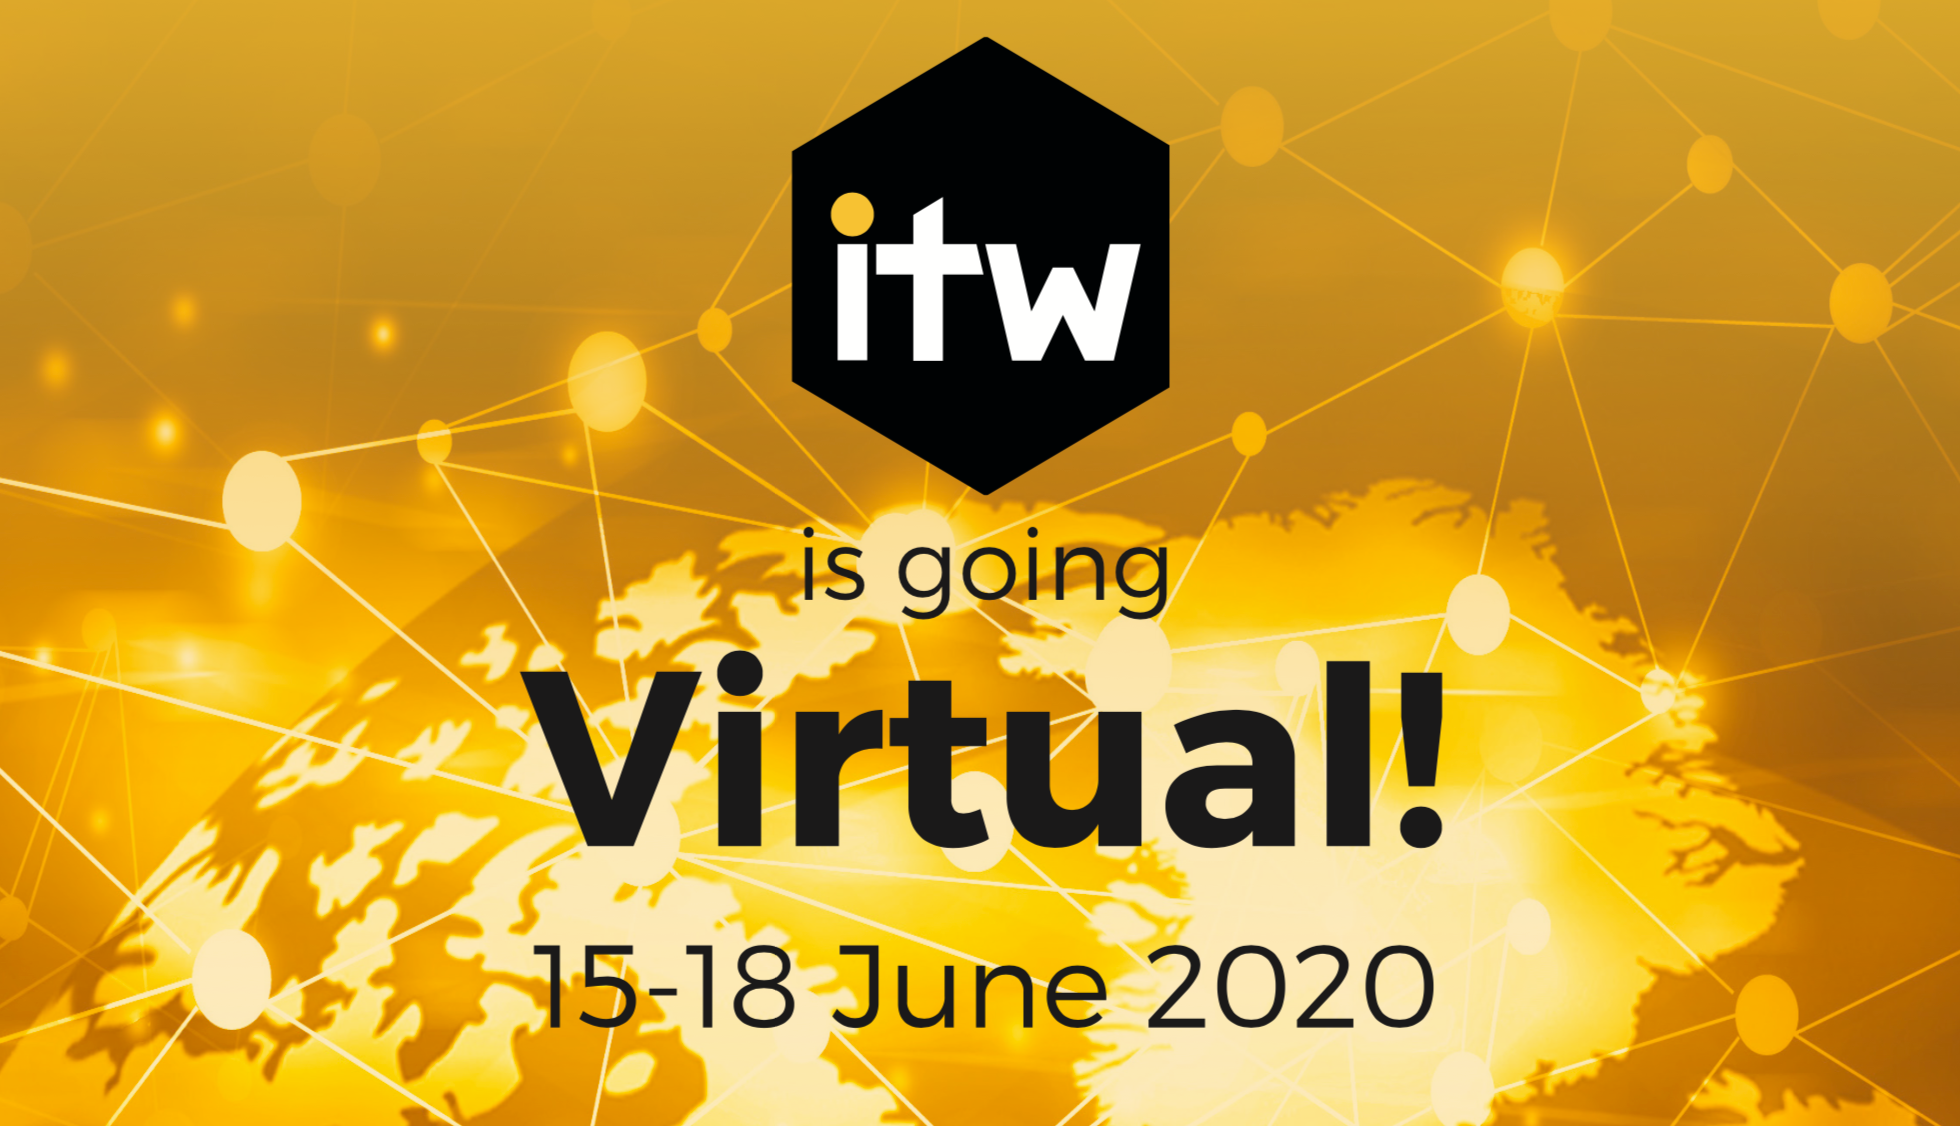 Meet DIDWW at the ITW 2020 Virtual event